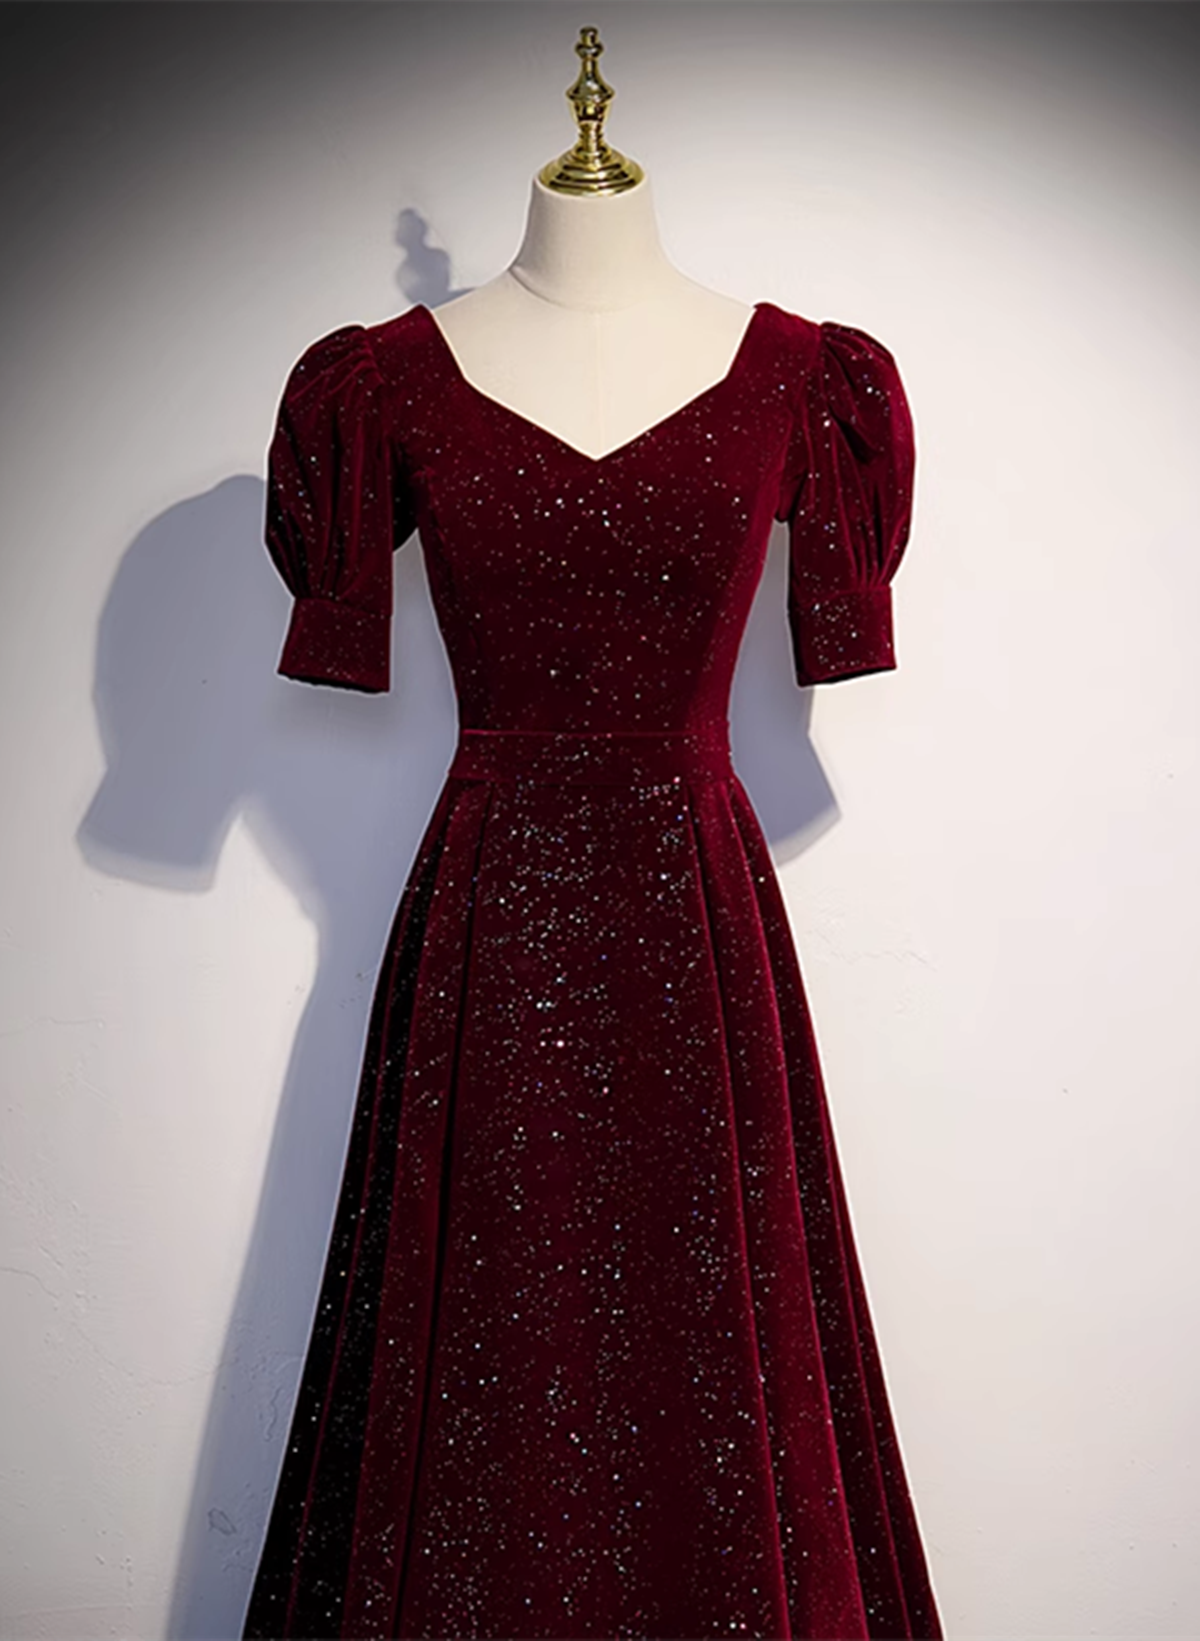 Simple A-line Wine Red Velvet Party Dress, Wine Red Prom Dress Evening Dress